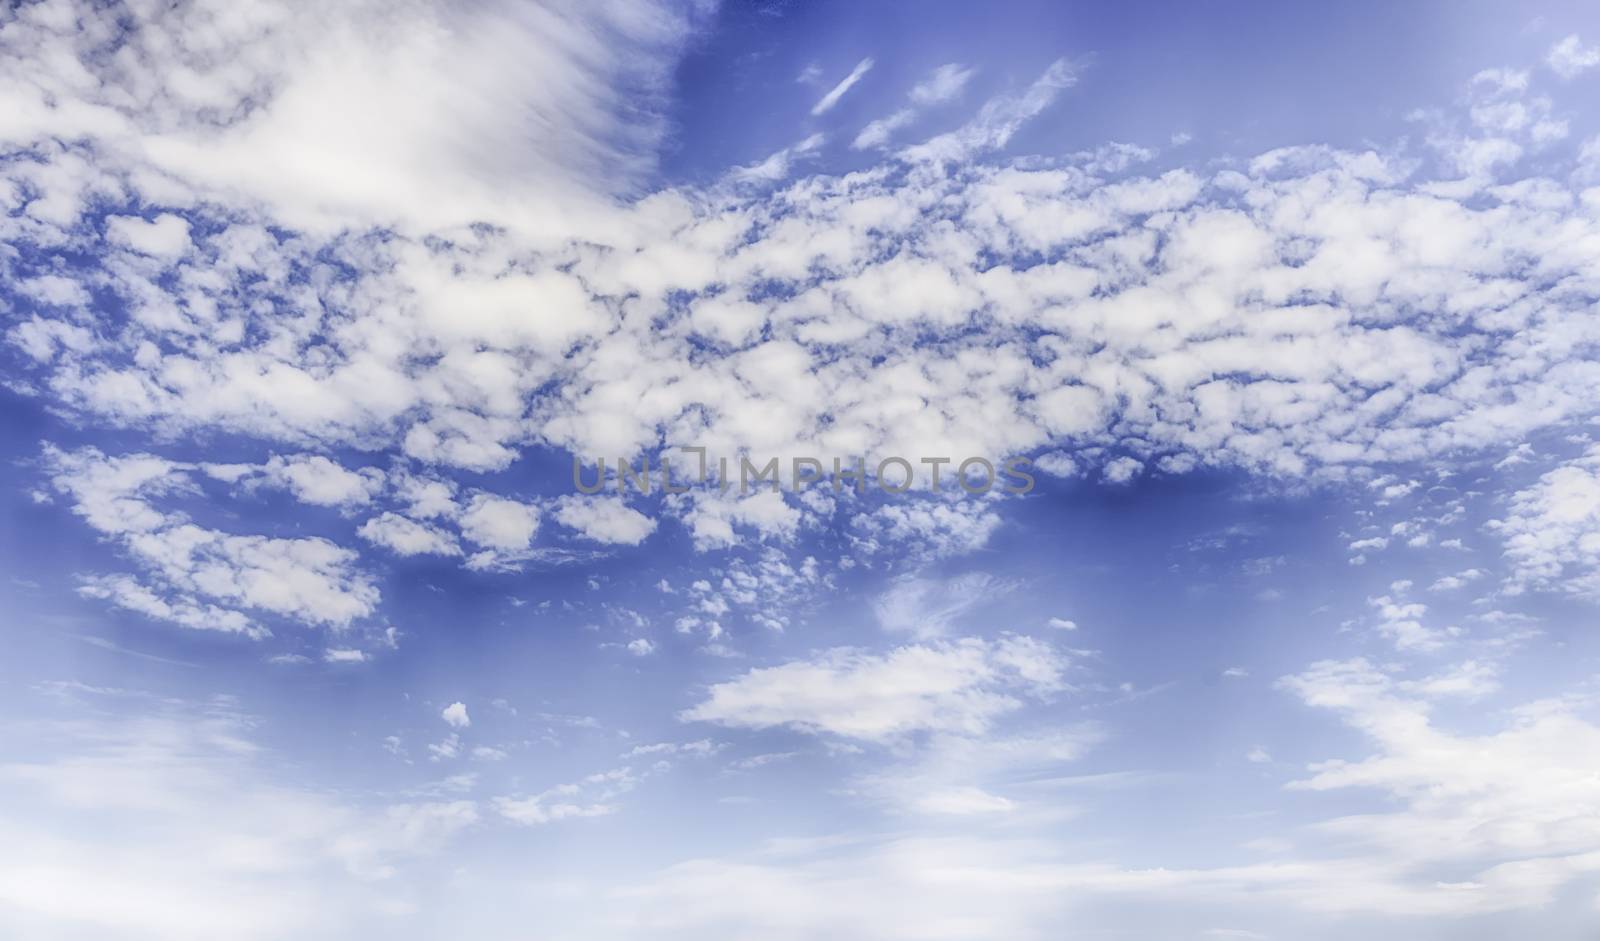 Blue sky with scenic clouds texture, useful as background by marcorubino